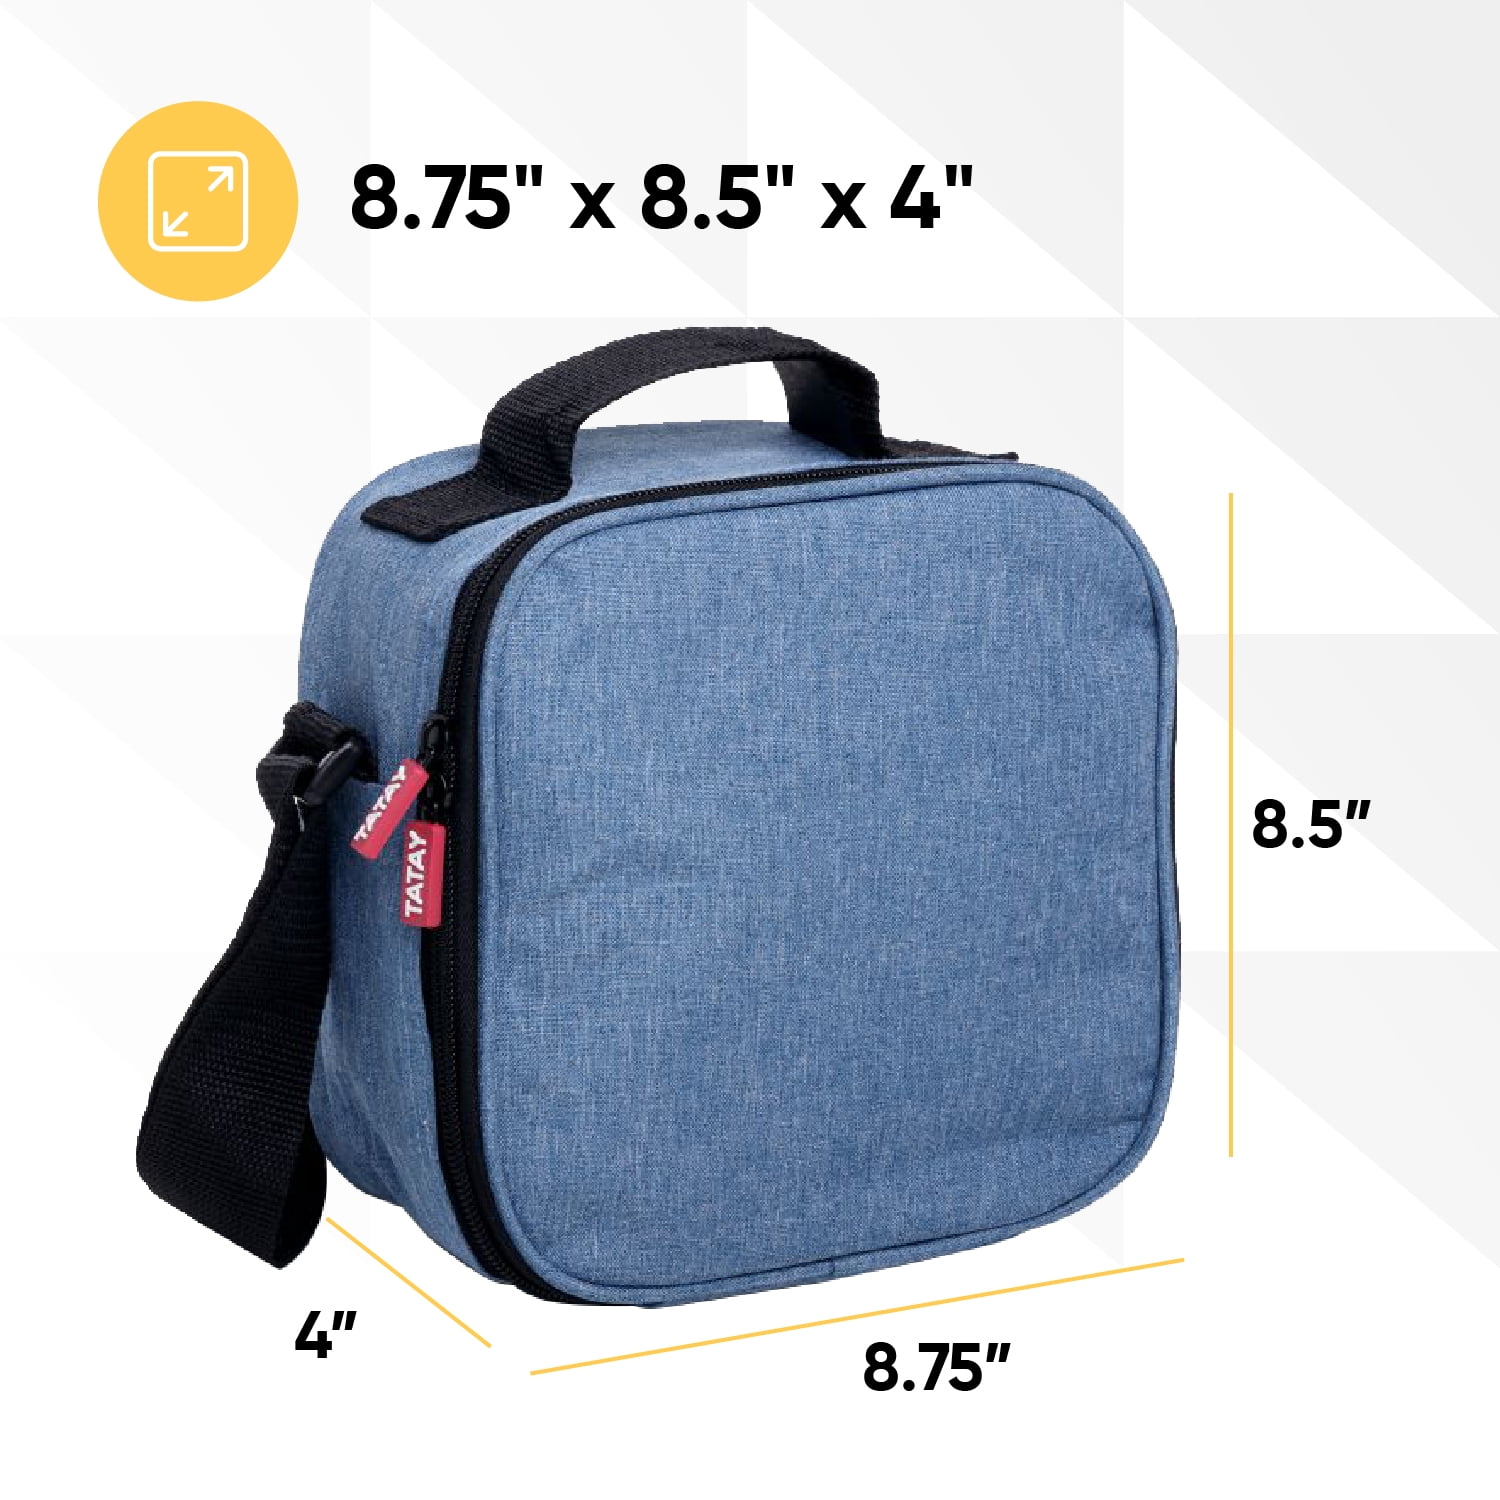 Superio Insulated Lunch Bag with Containers for Men/kids Reusable, Leak Proof Containers for Travel, and Beach, Grey Checked Small School Lunch Box